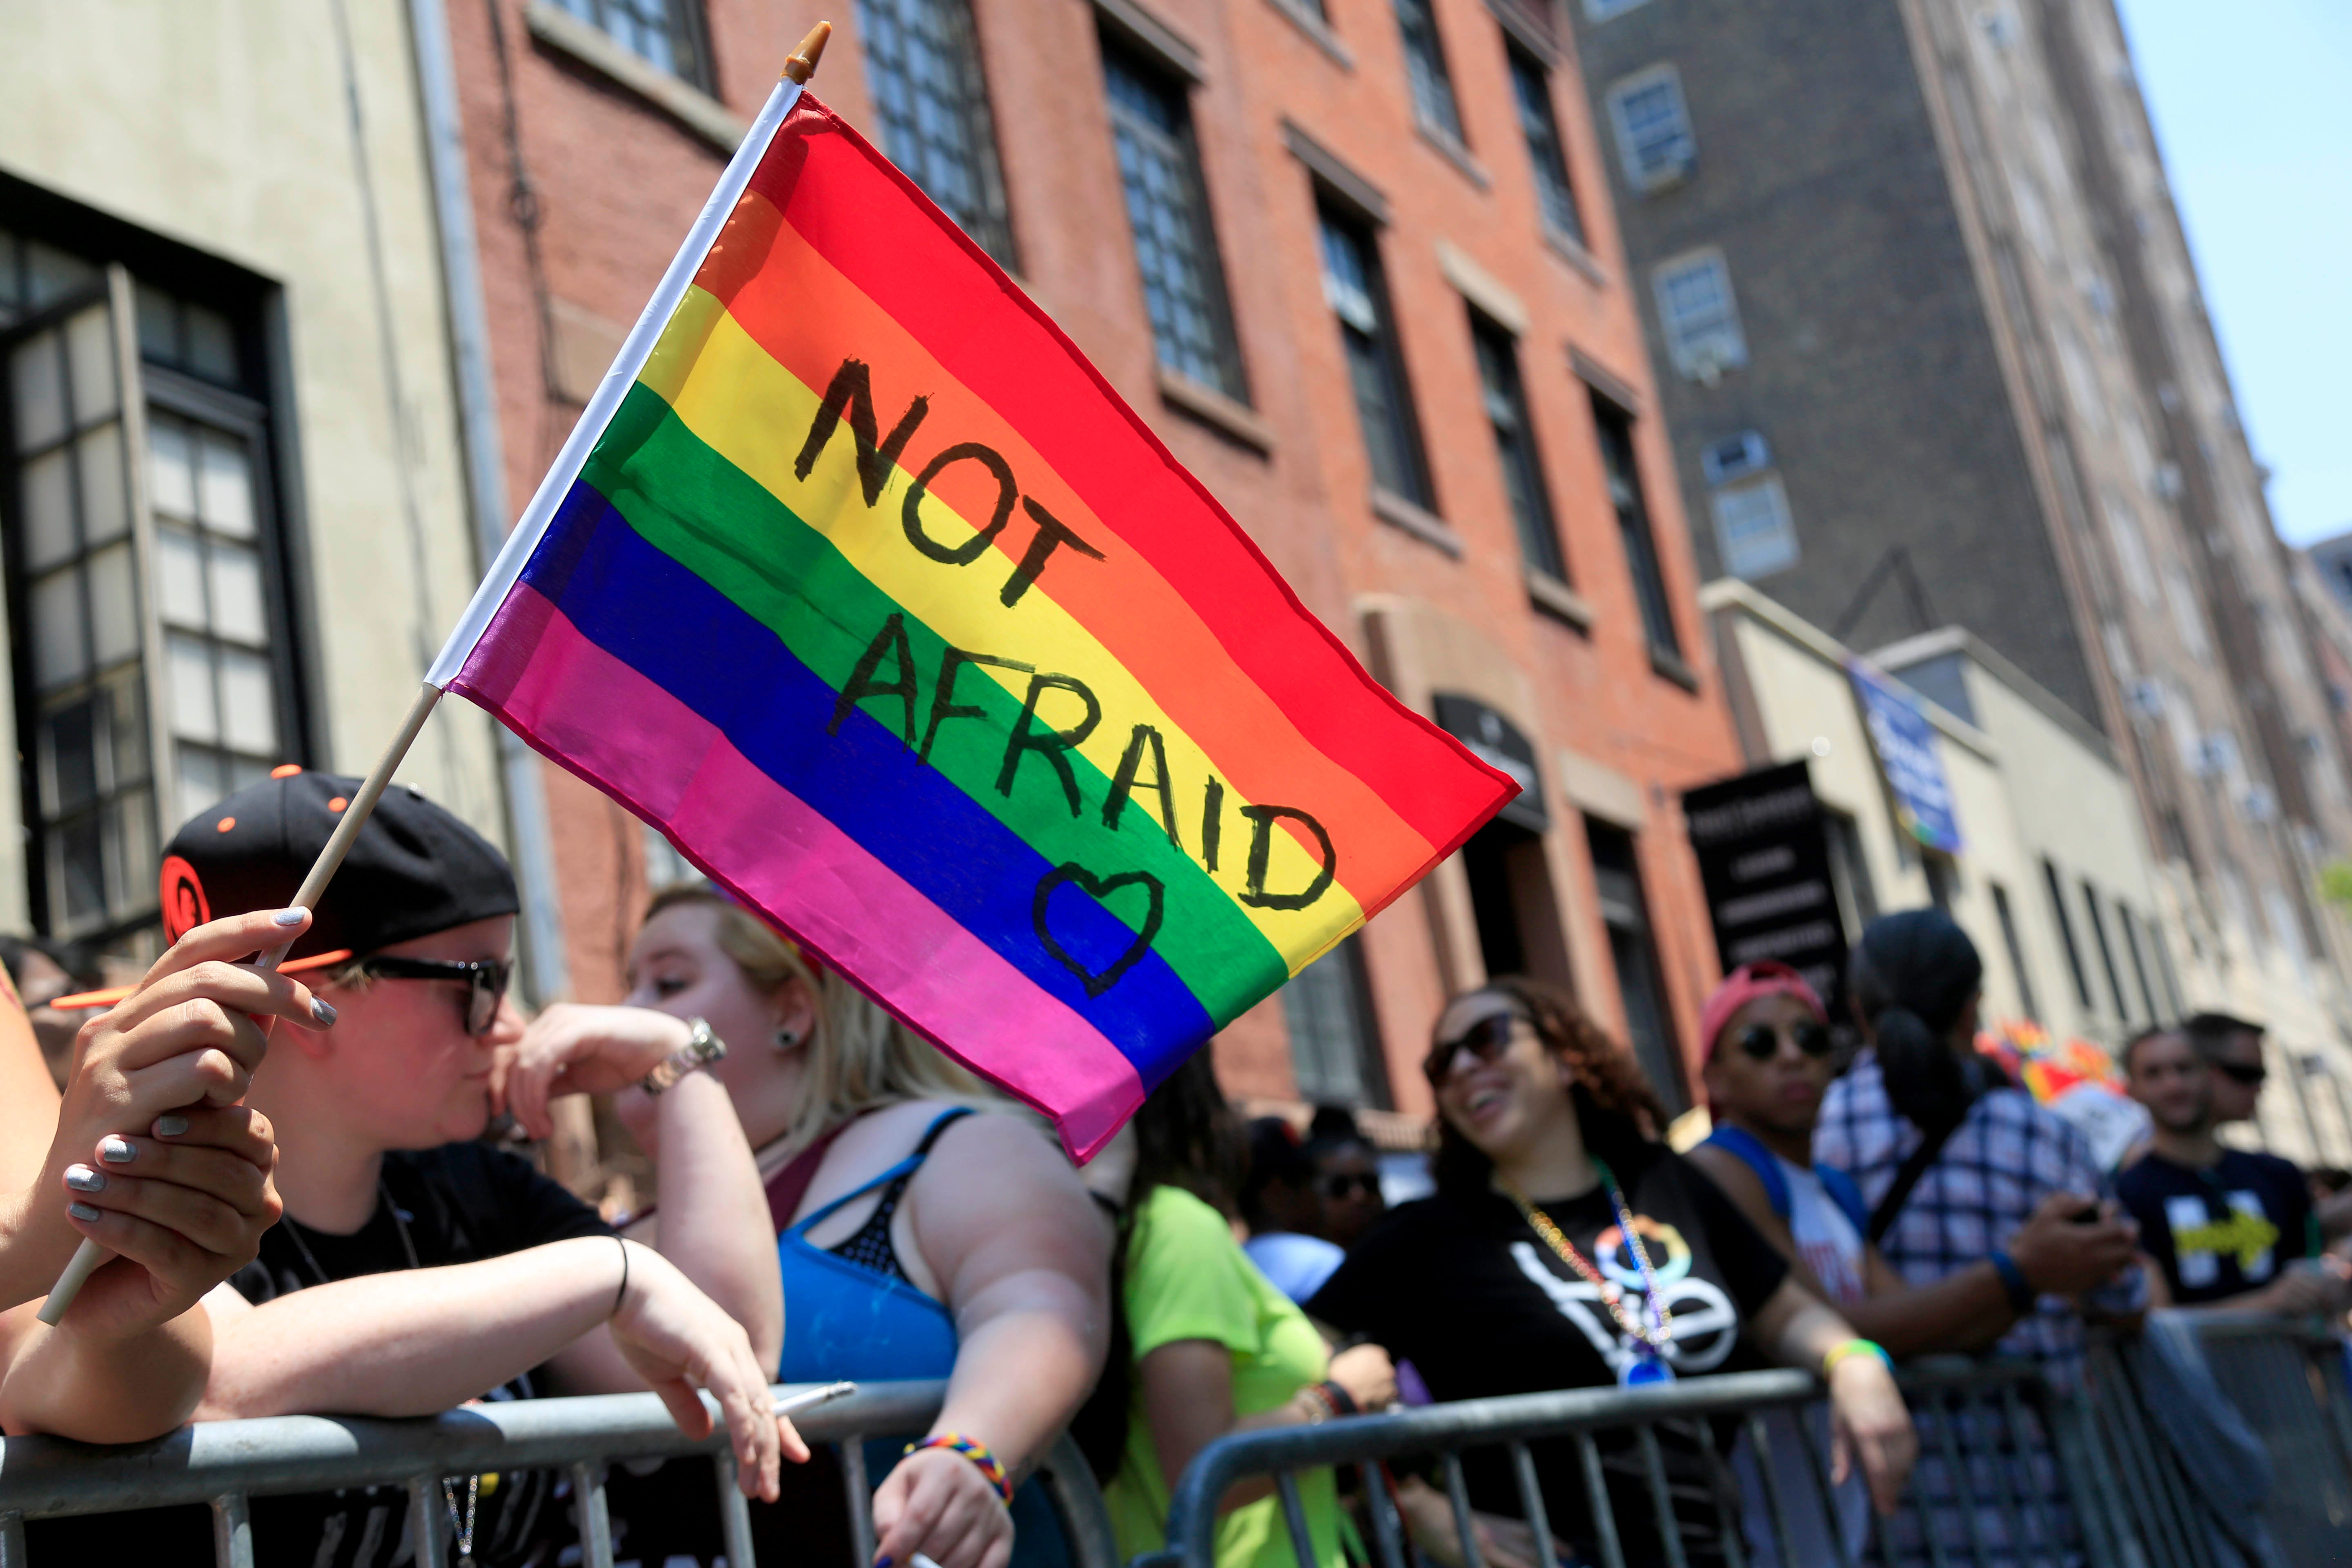 Motel dinosaurio Adiccion Straight Pride parade plans in Boston started by right-wing group